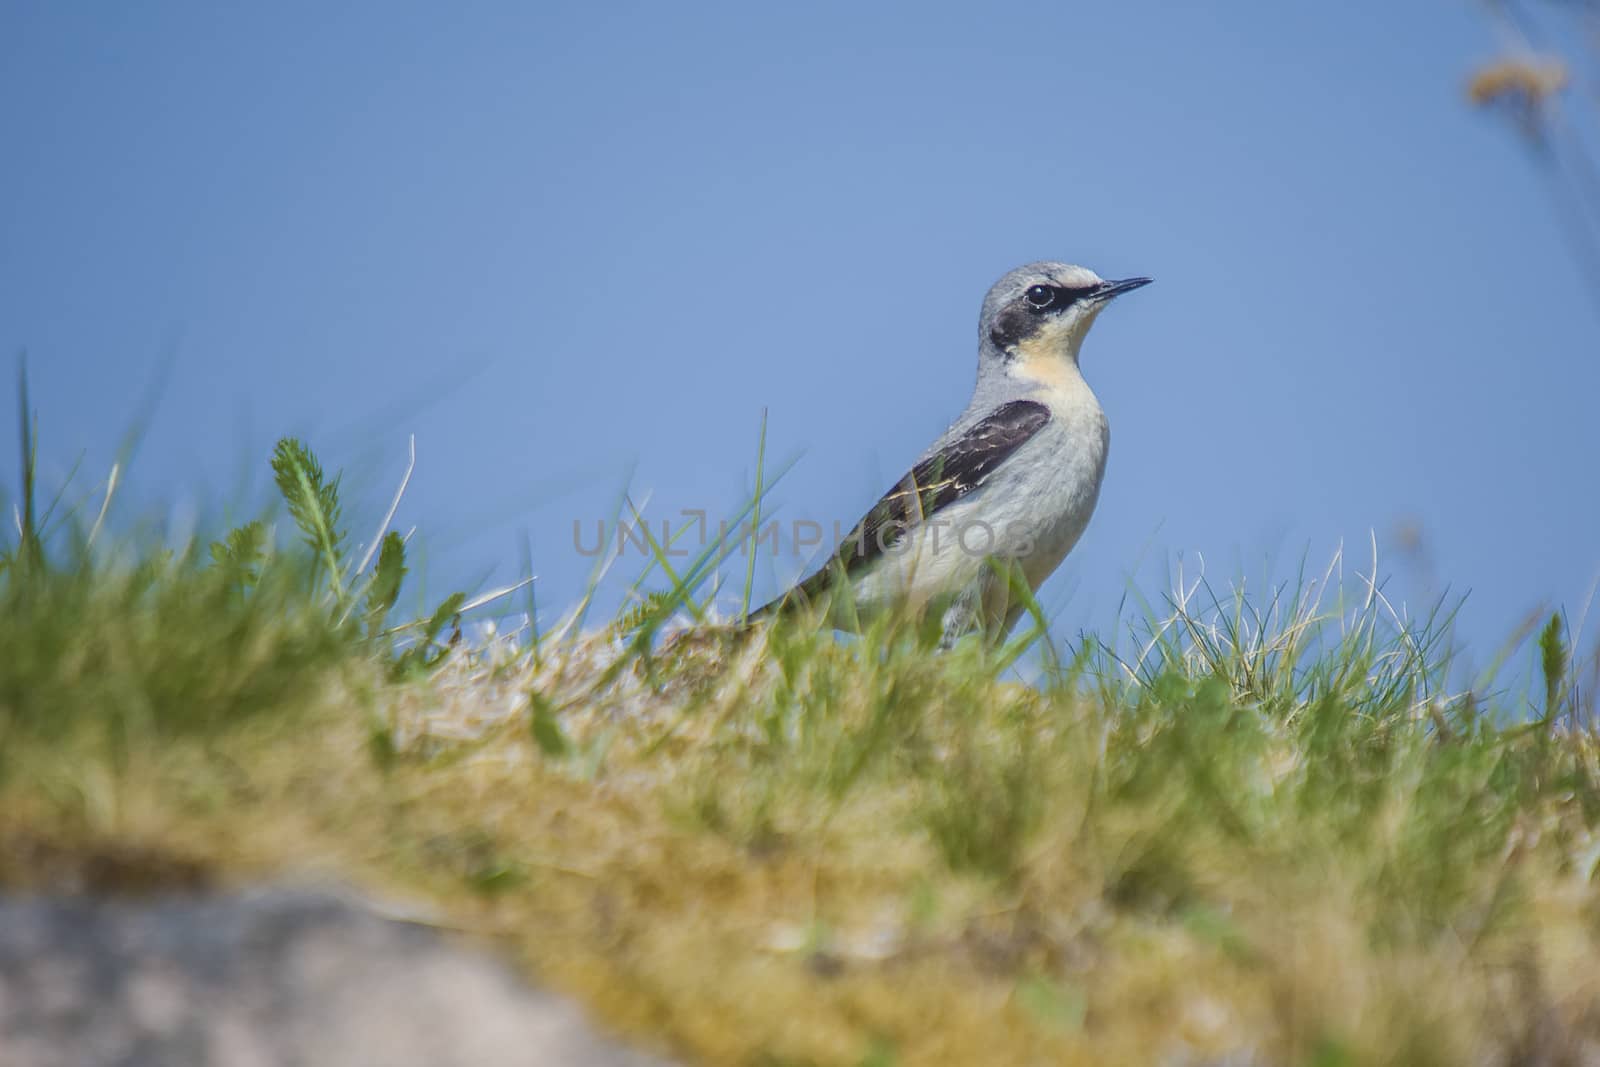 The image of wheatear, Oenanthe Oenanthe is shot by the walls of Fredriksten fortress in Halden, Norway